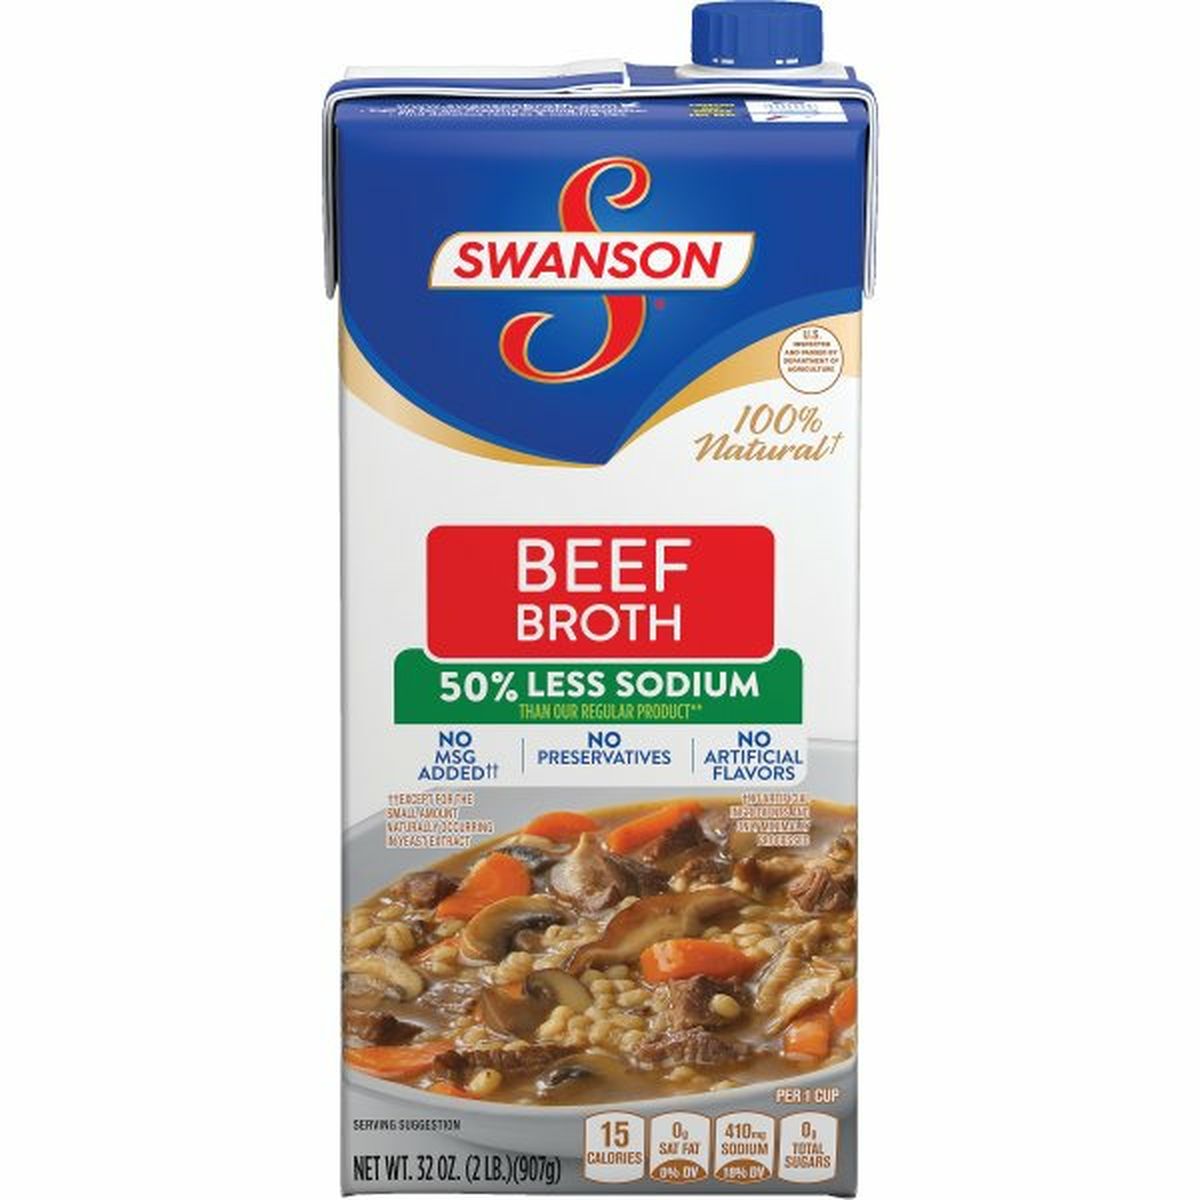 Calories in Swanson's 50% Less Sodium Beef Broth